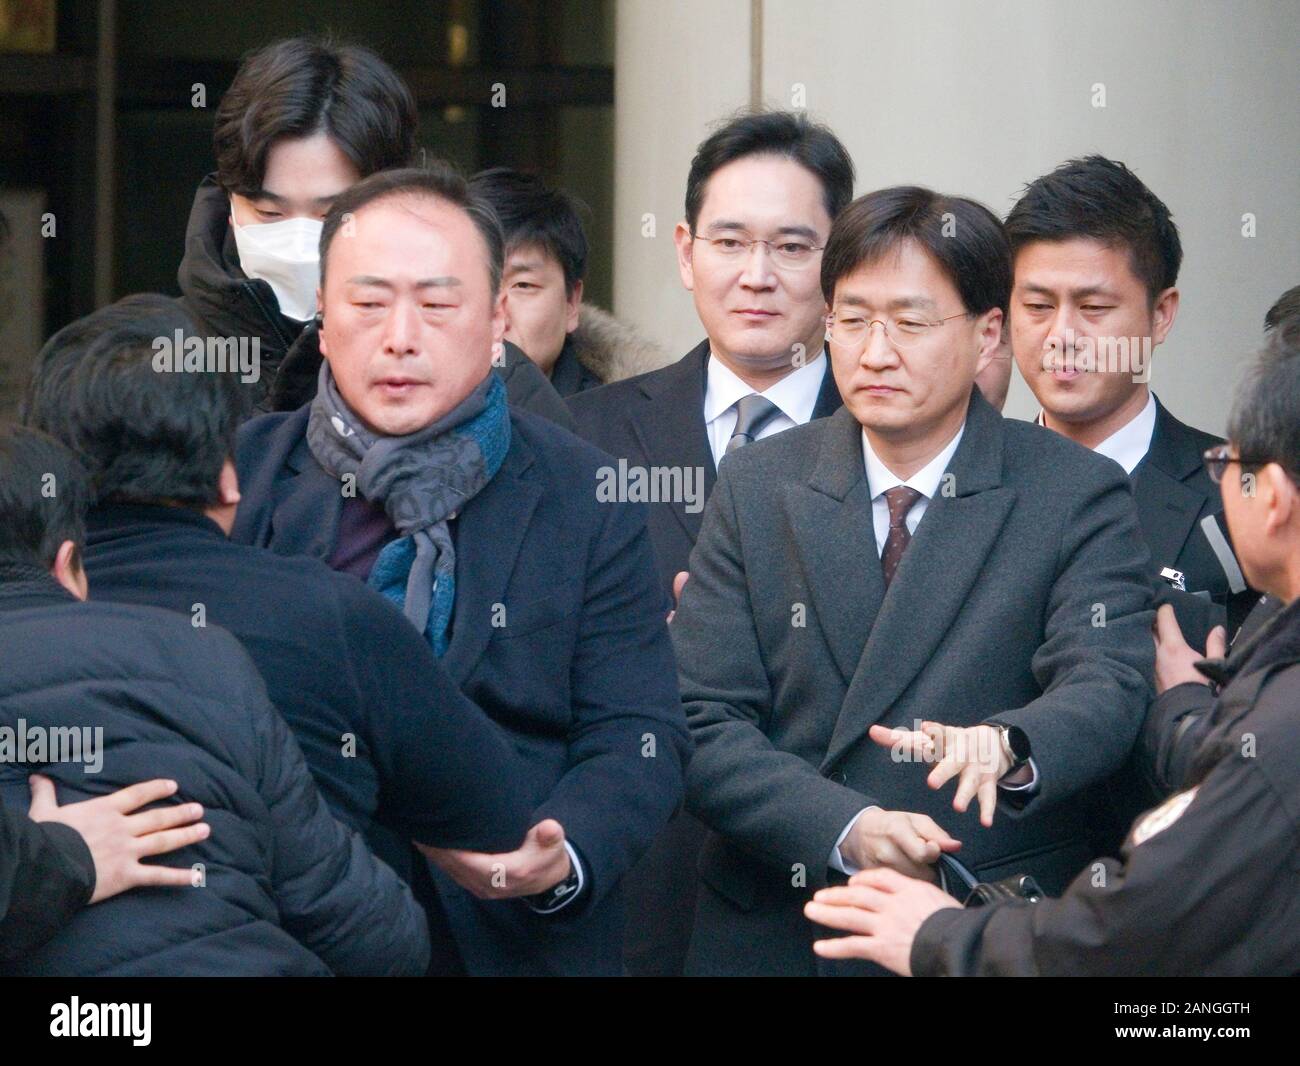 Seoul High Court in South Korea. 17th January, 2020. Lee Jae-Yong, Jan 17, 2020 : A former Samsung worker (2nd L) protests against Samsung Electronics Vice Chairman Lee Jae-Yong (C) as the latter leaves after his trial at the Seoul High Court in Seoul, South Korea. Dozens of former Samsung workers were holding a protest against Samsung which they insist, fired them unfairly and spied on them who were trying to organize a labor union. Credit: Aflo Co. Ltd./Alamy Live News Stock Photo